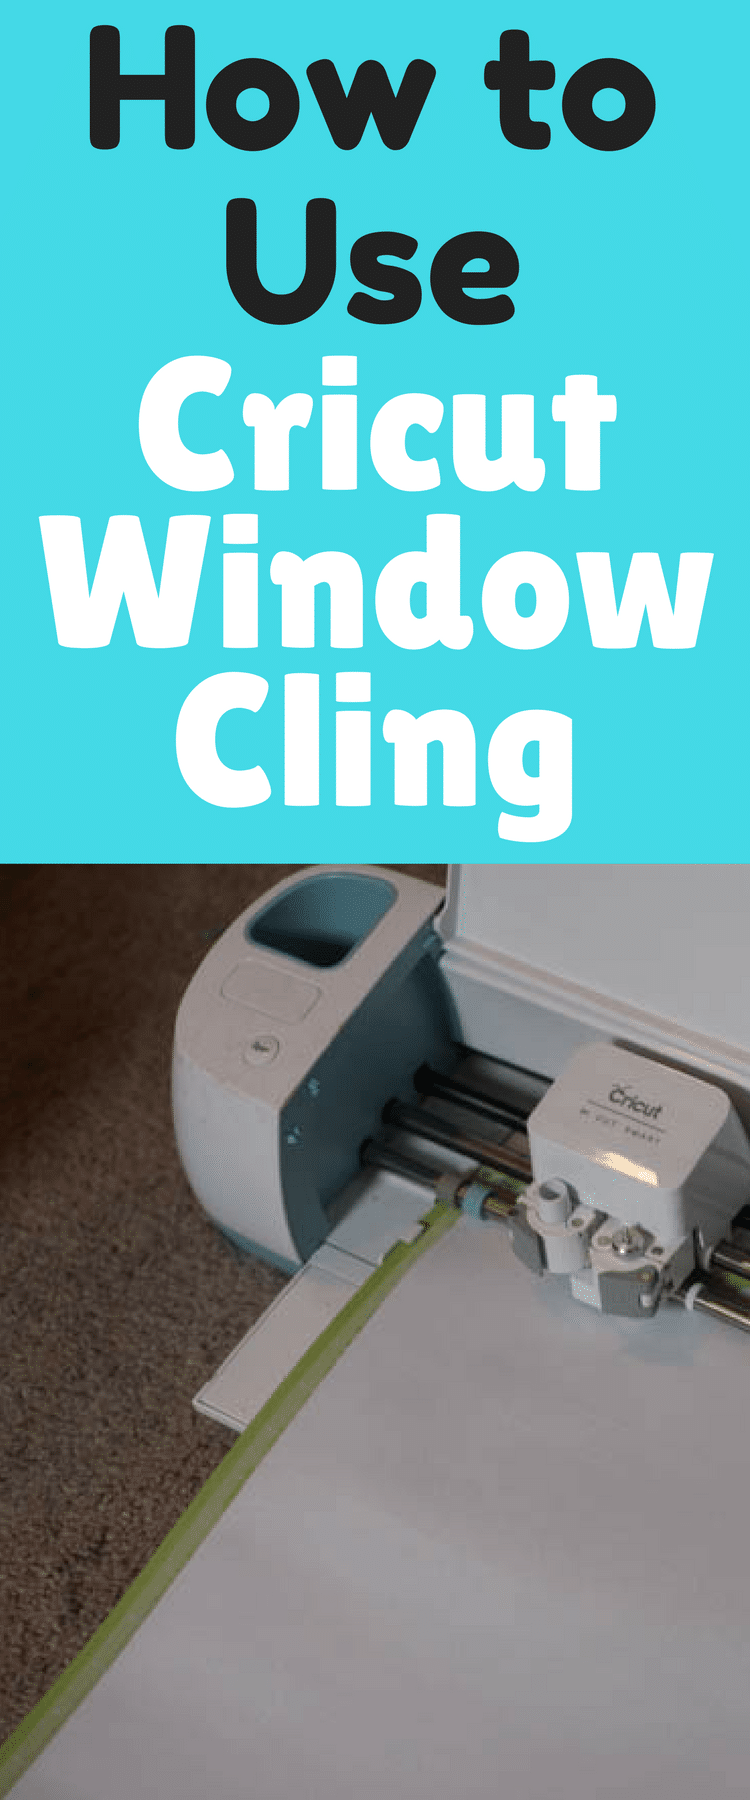 Cricut Window Cling: How and When to Use It 